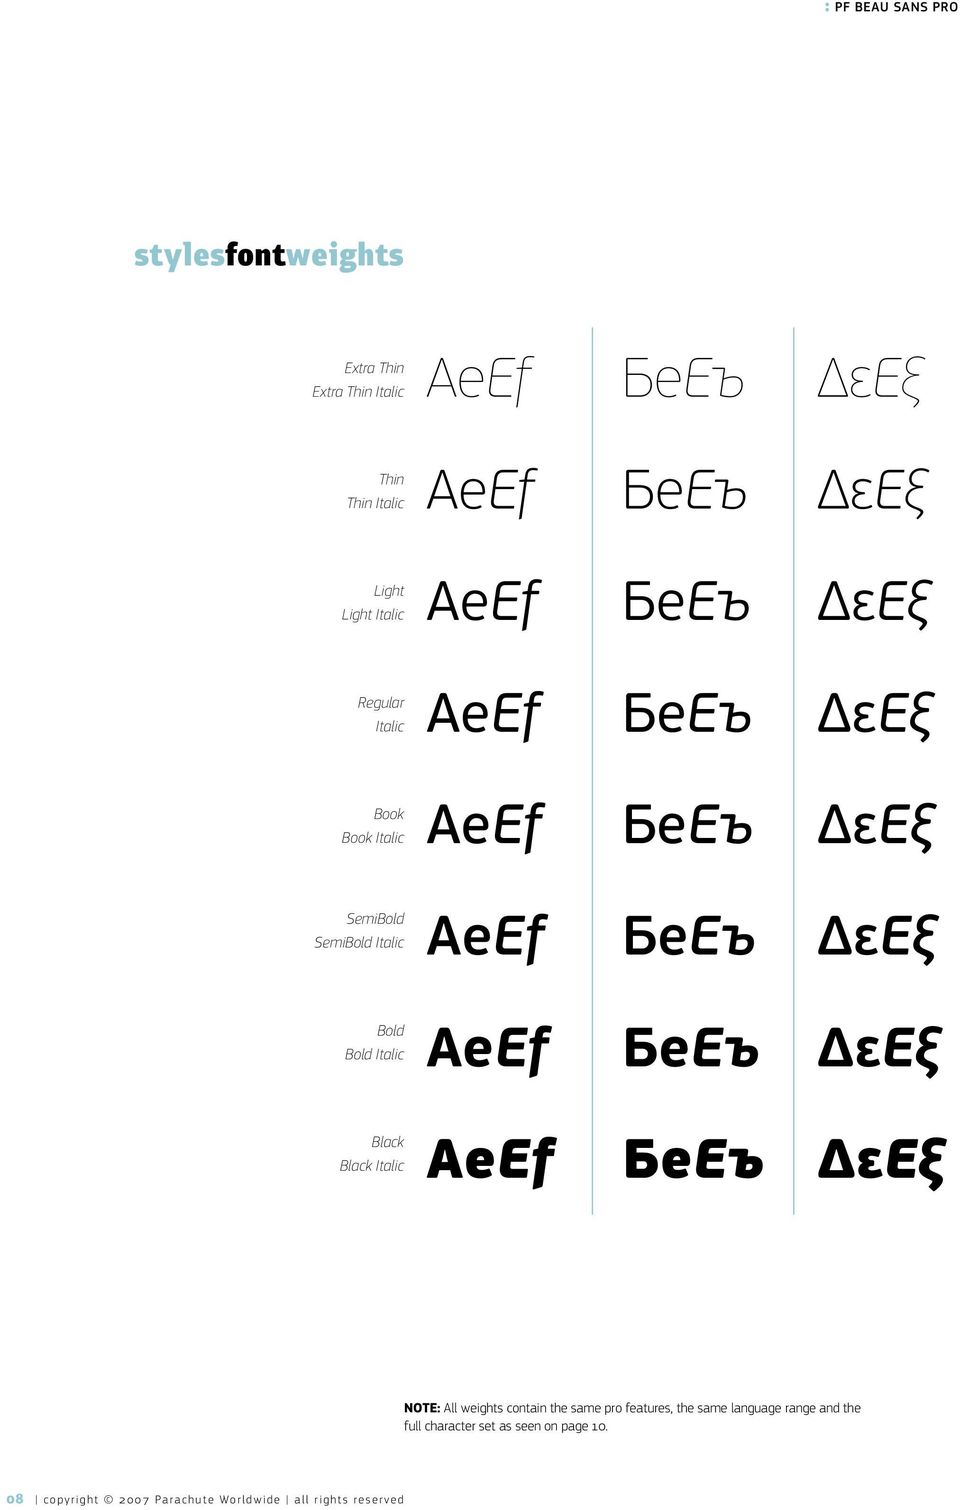 Bold Italic AeΕf БеЕъ εeξ Black Black Italic AeΕf БеЕъ εeξ NOTE: All weights contain the same pro features, the